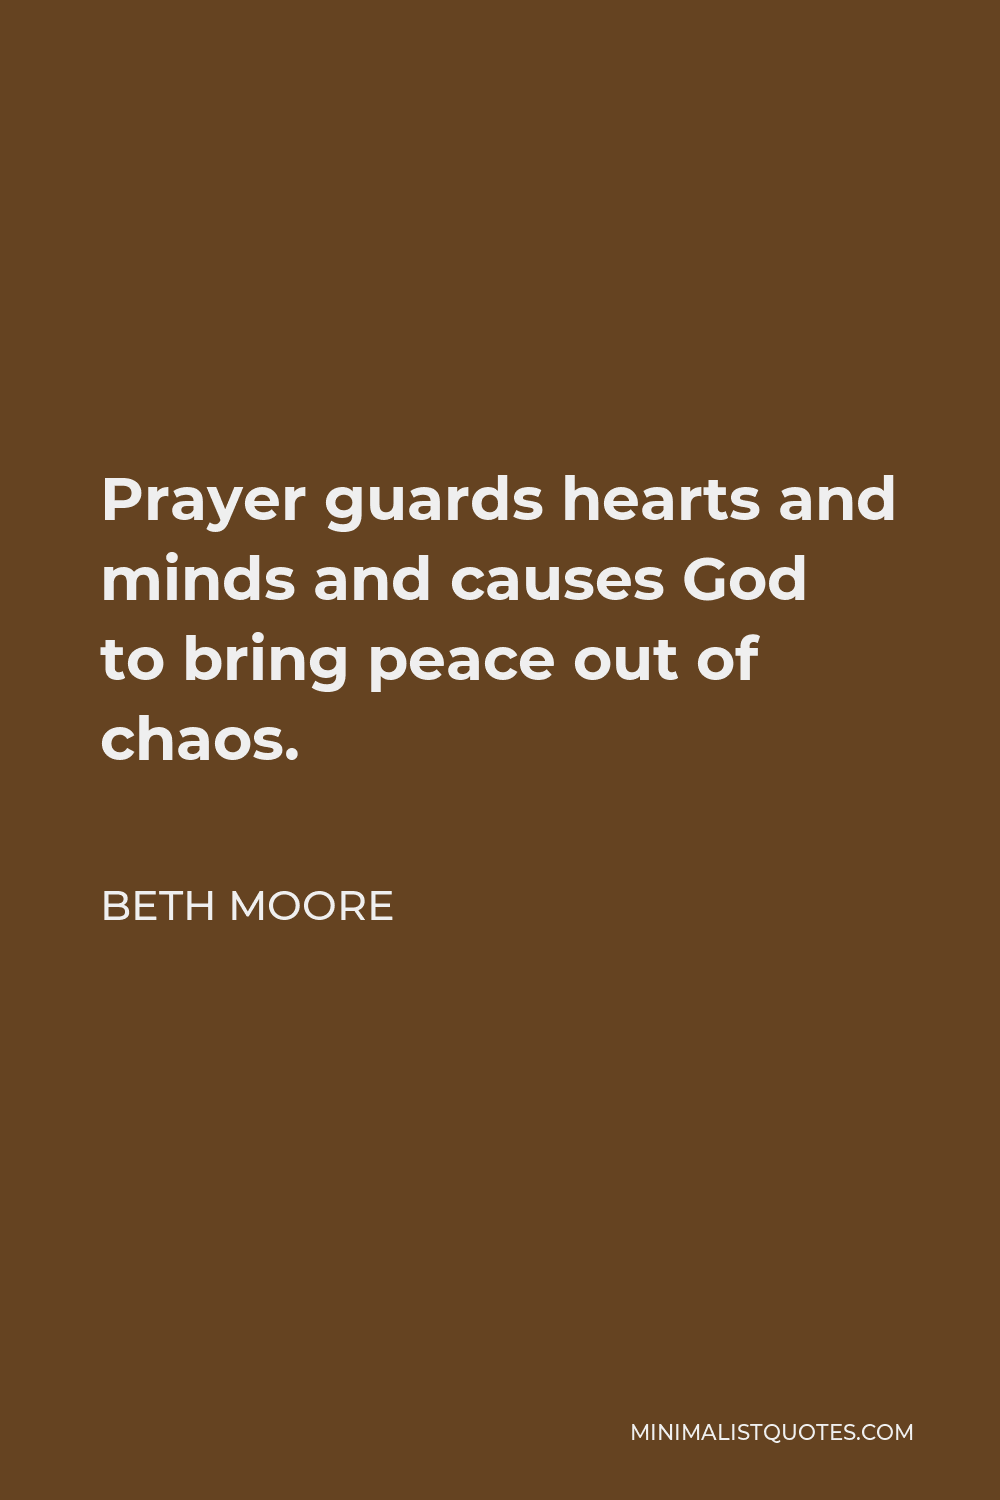 Beth Moore Quote - Prayer guards hearts and minds and causes God to bring peace out of chaos.